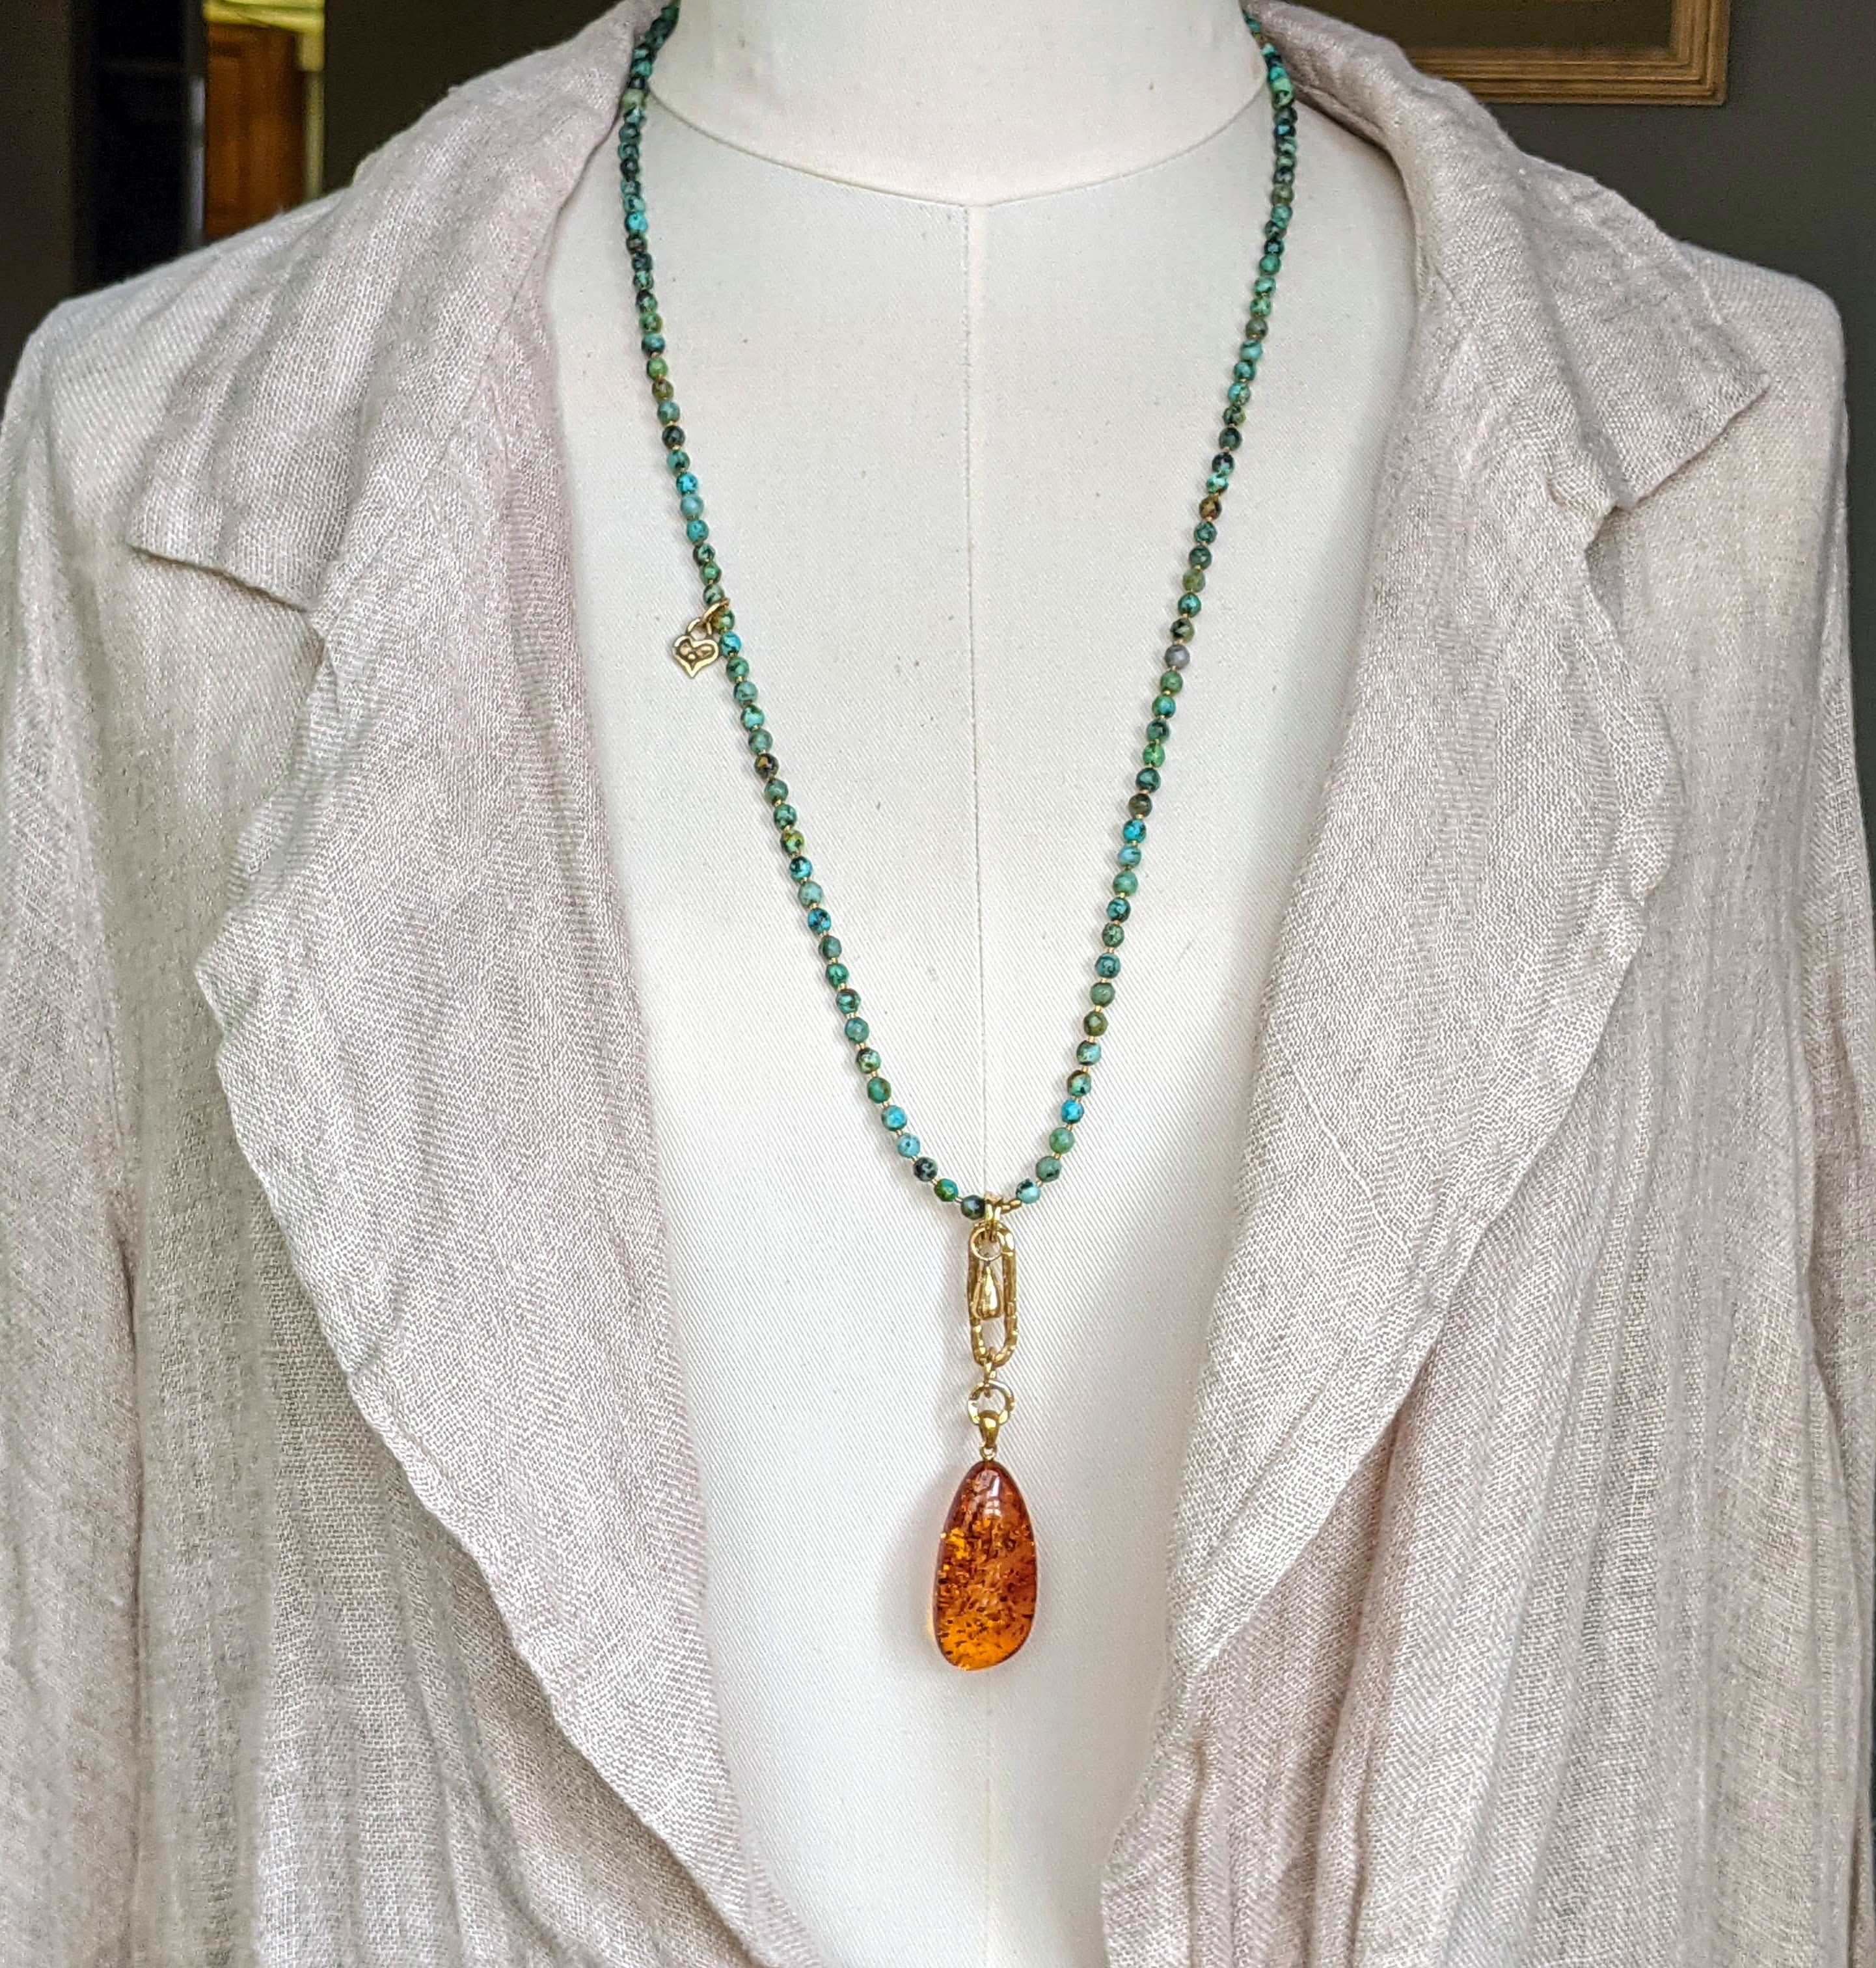 Long African Turquoise Necklace & Baltic Amber Pendant